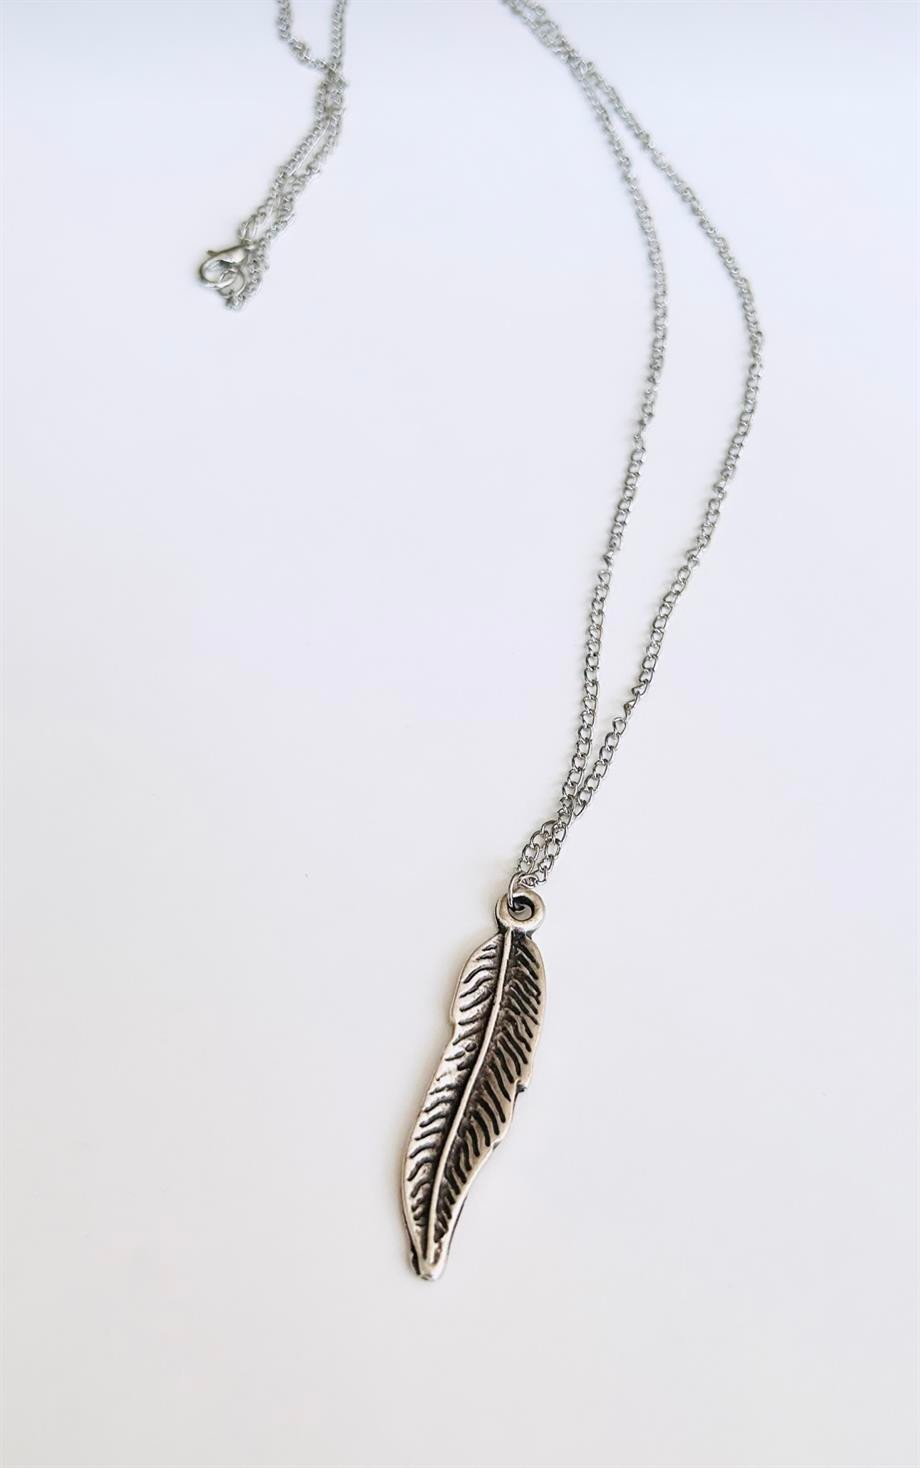 Silver color necklace with male leaf figures